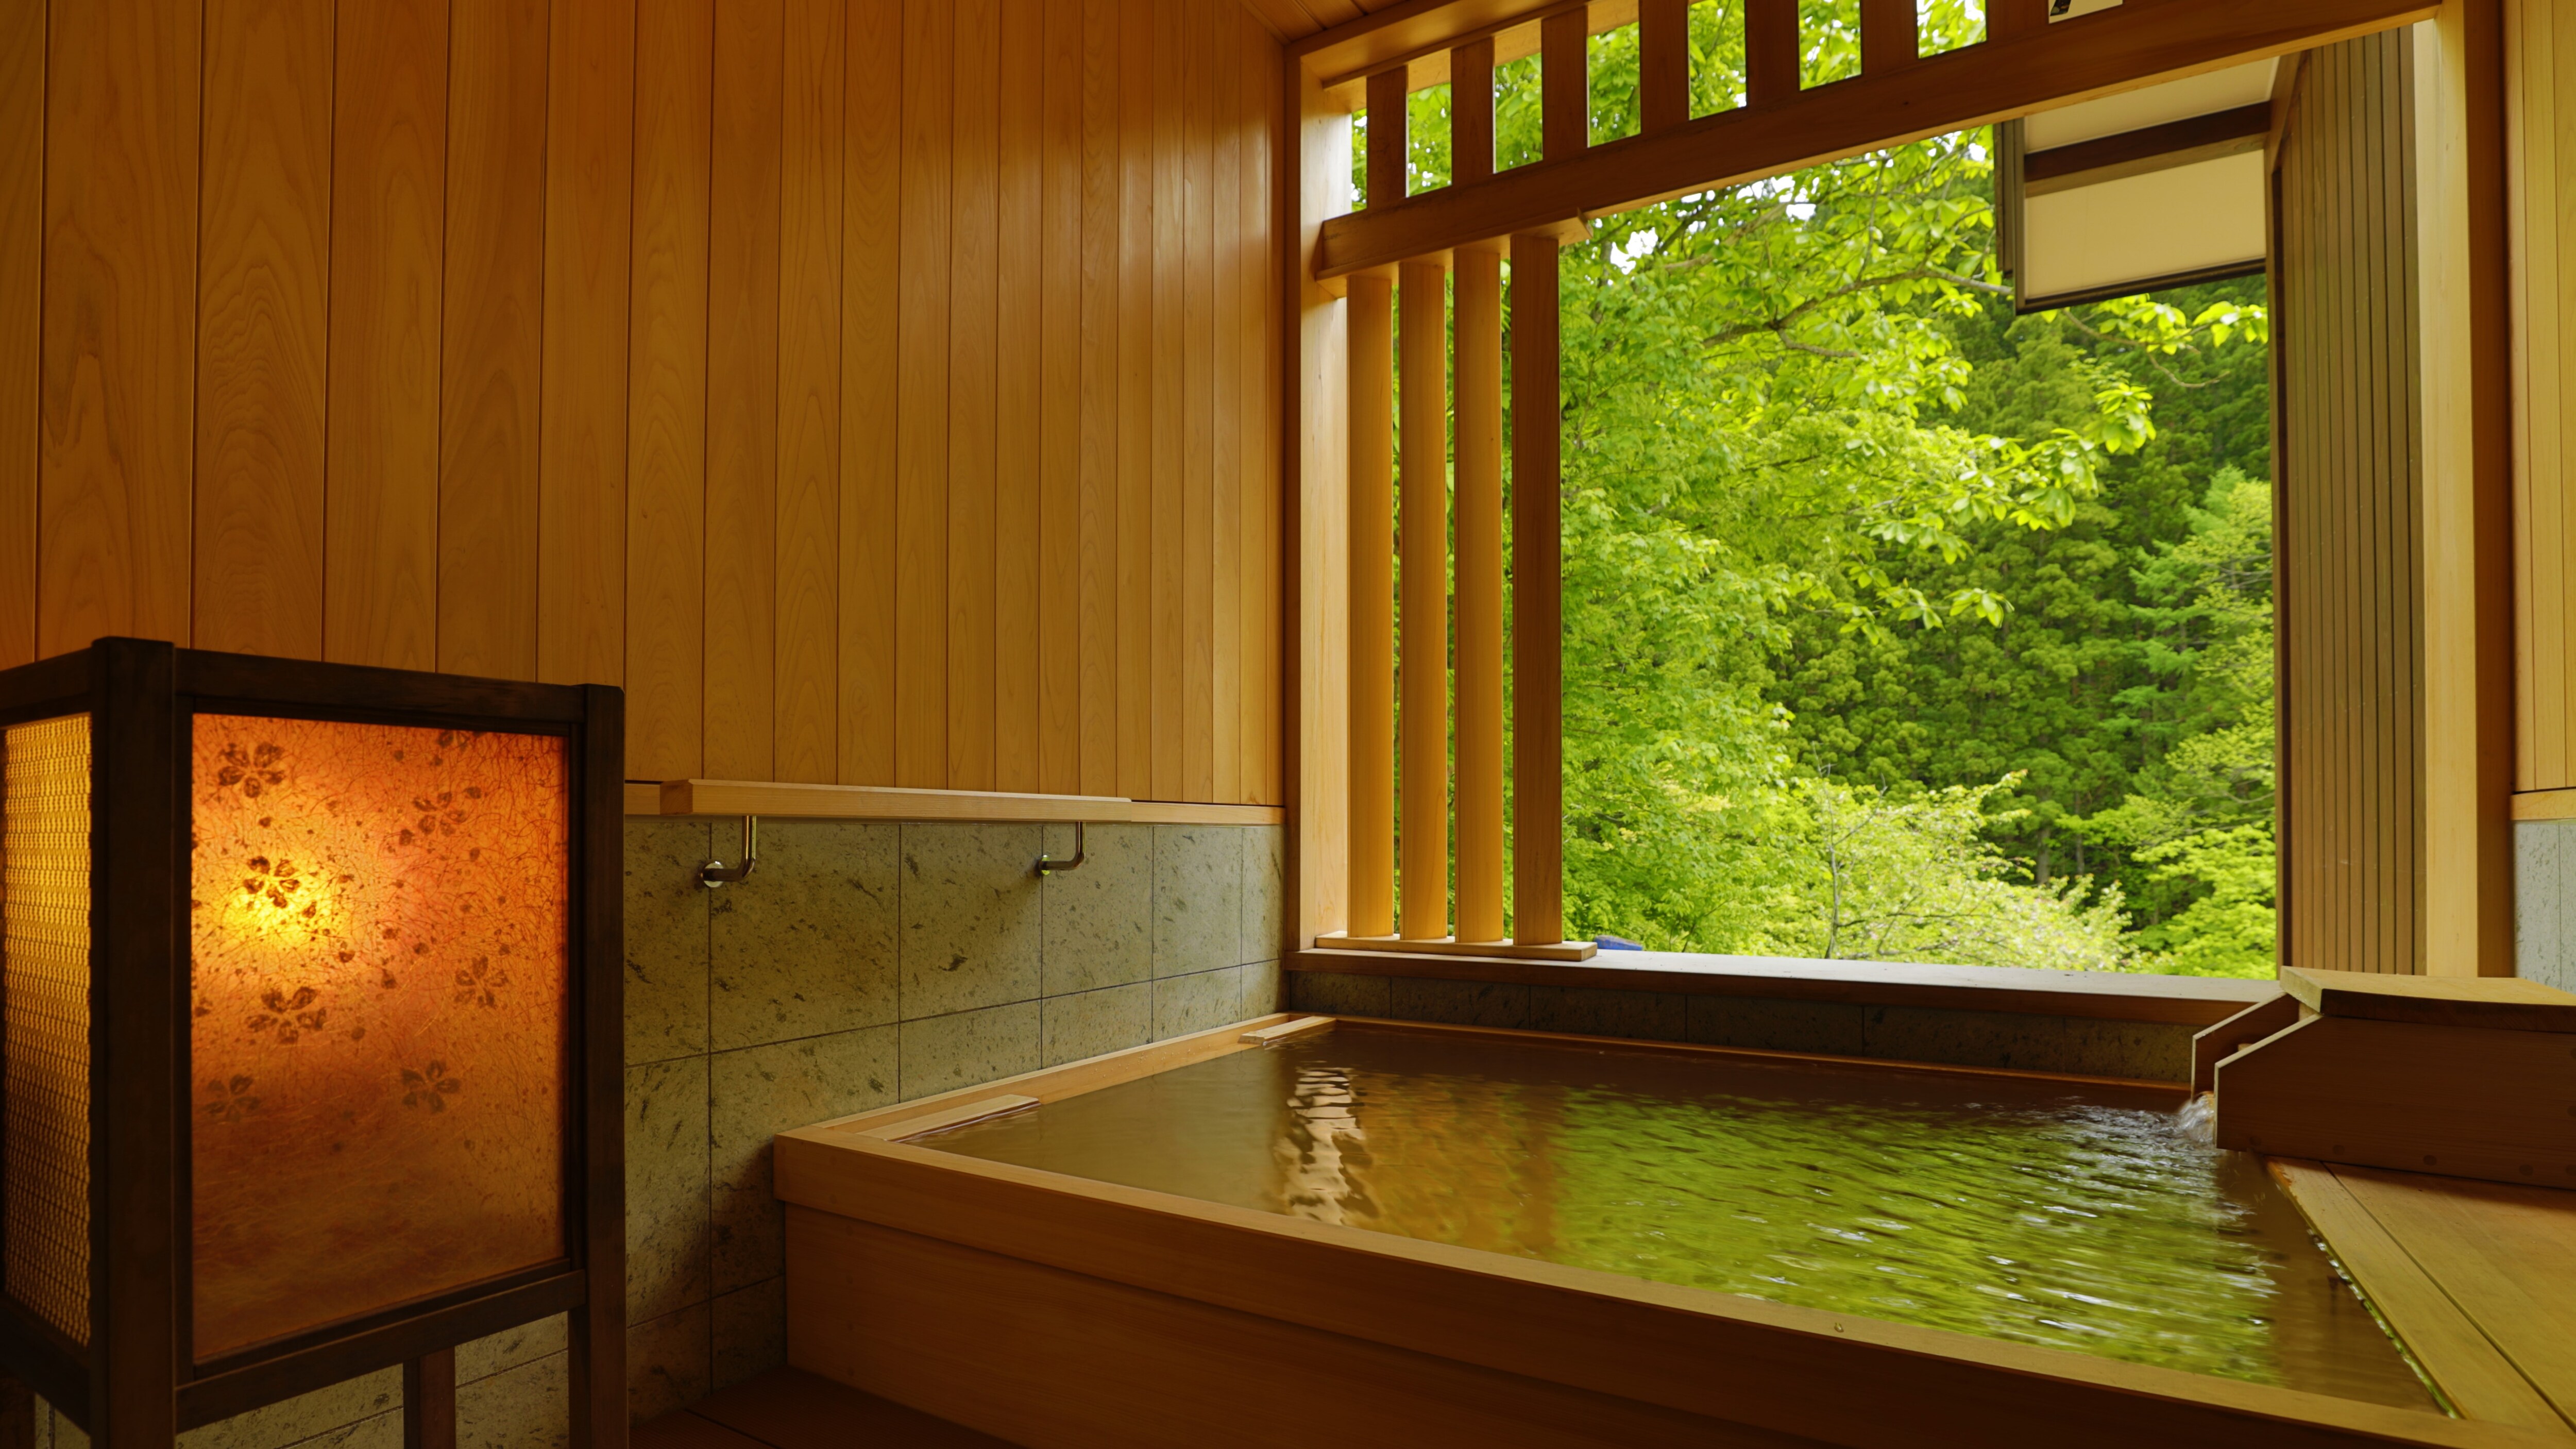 [Chartered bath] "Sakuraun" A bath made of Japanese cypress to heal your tiredness while feeling the scent of wood.